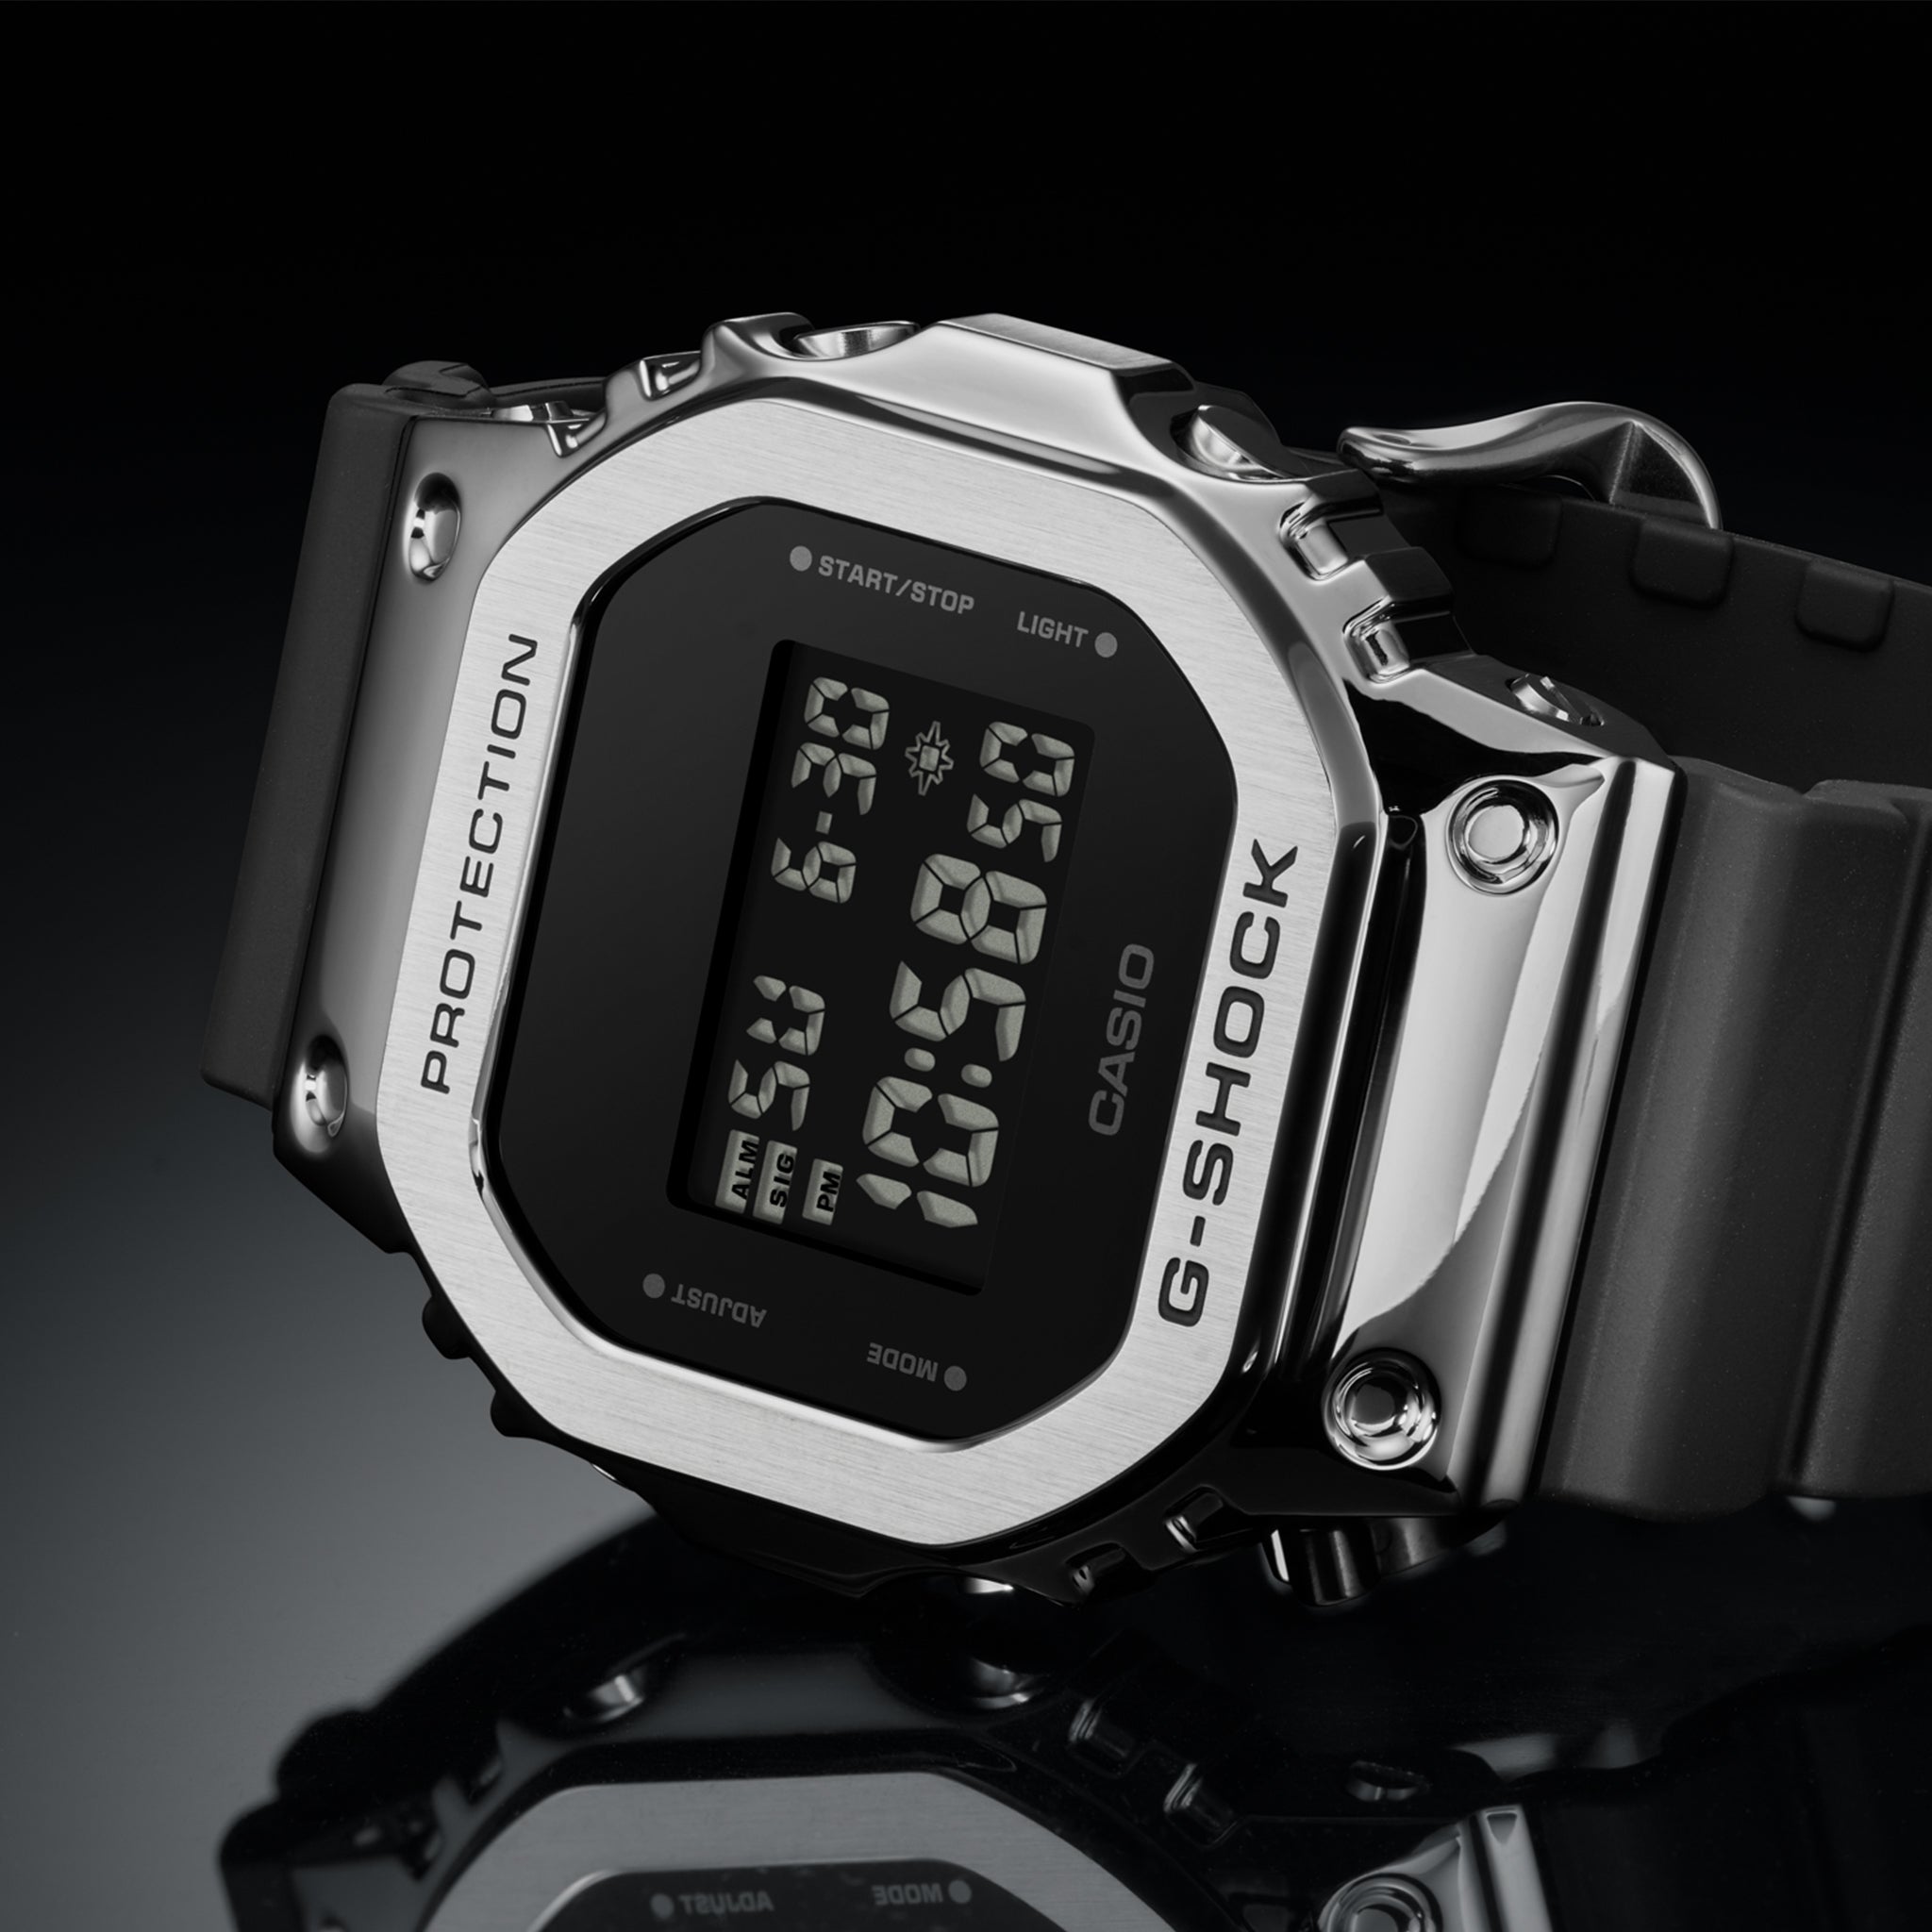 G-SHOCK GM5600-1 With Stainless Steel Bezel And Resin Strap